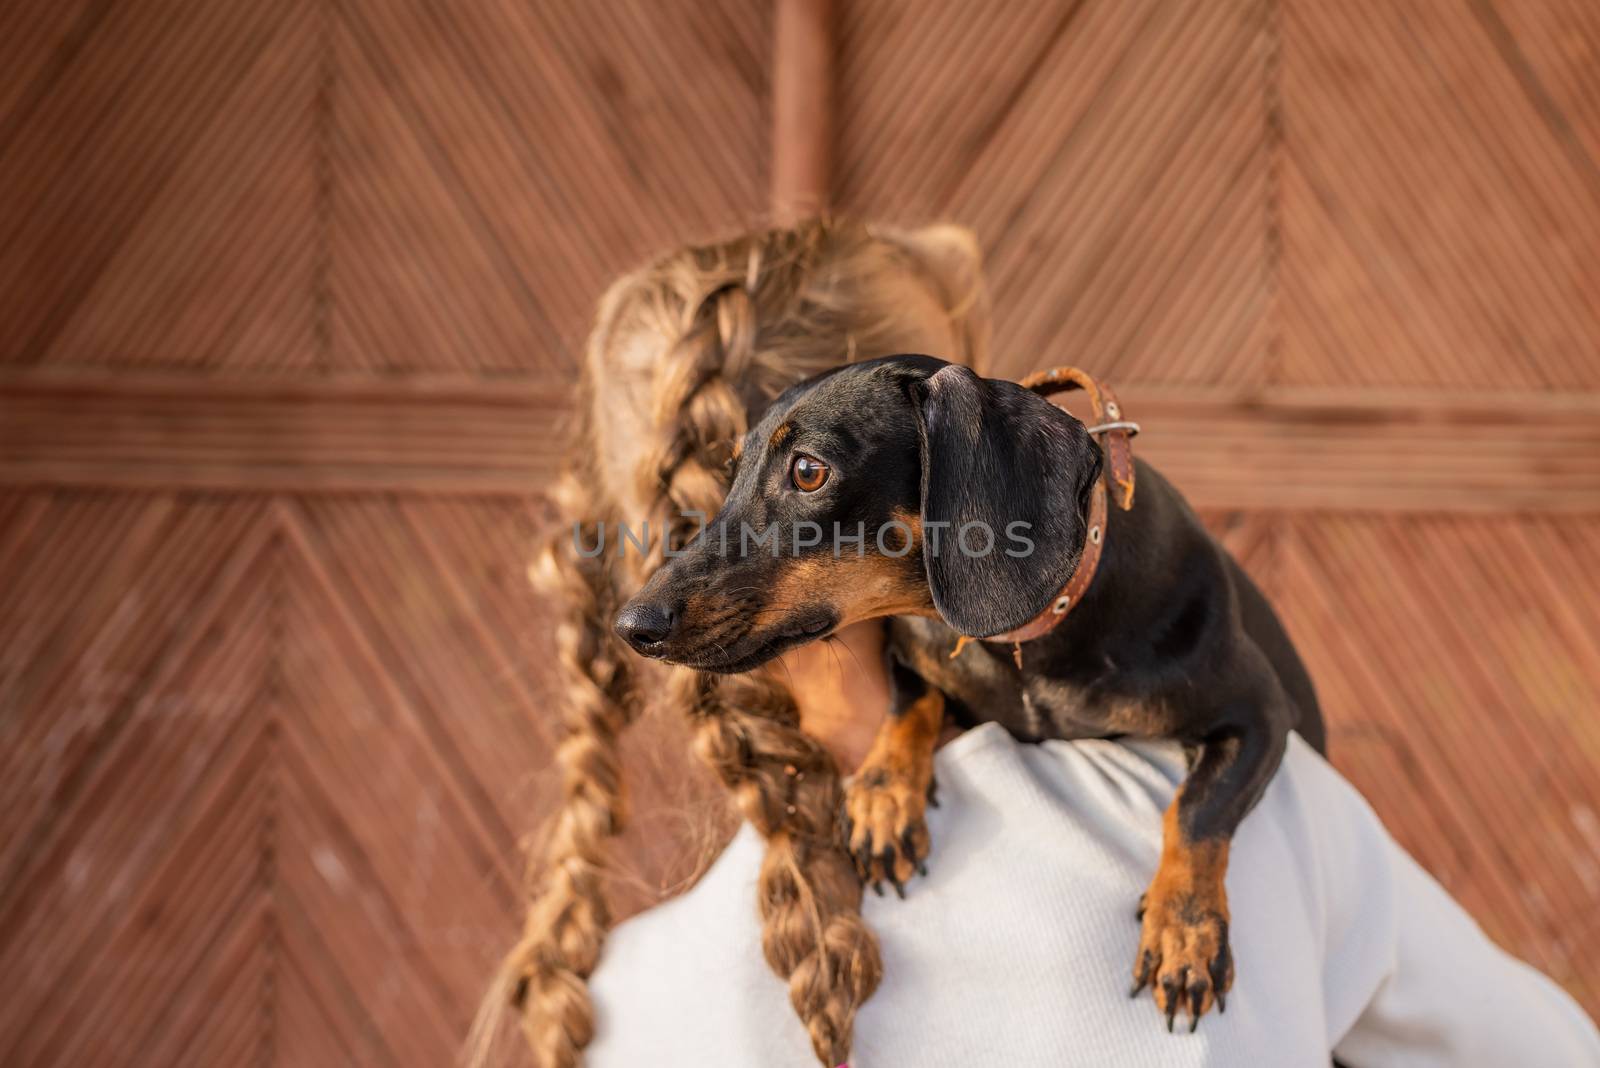 Young woman with plaited hair holding her pet dachshund in her arms outdoors by Desperada